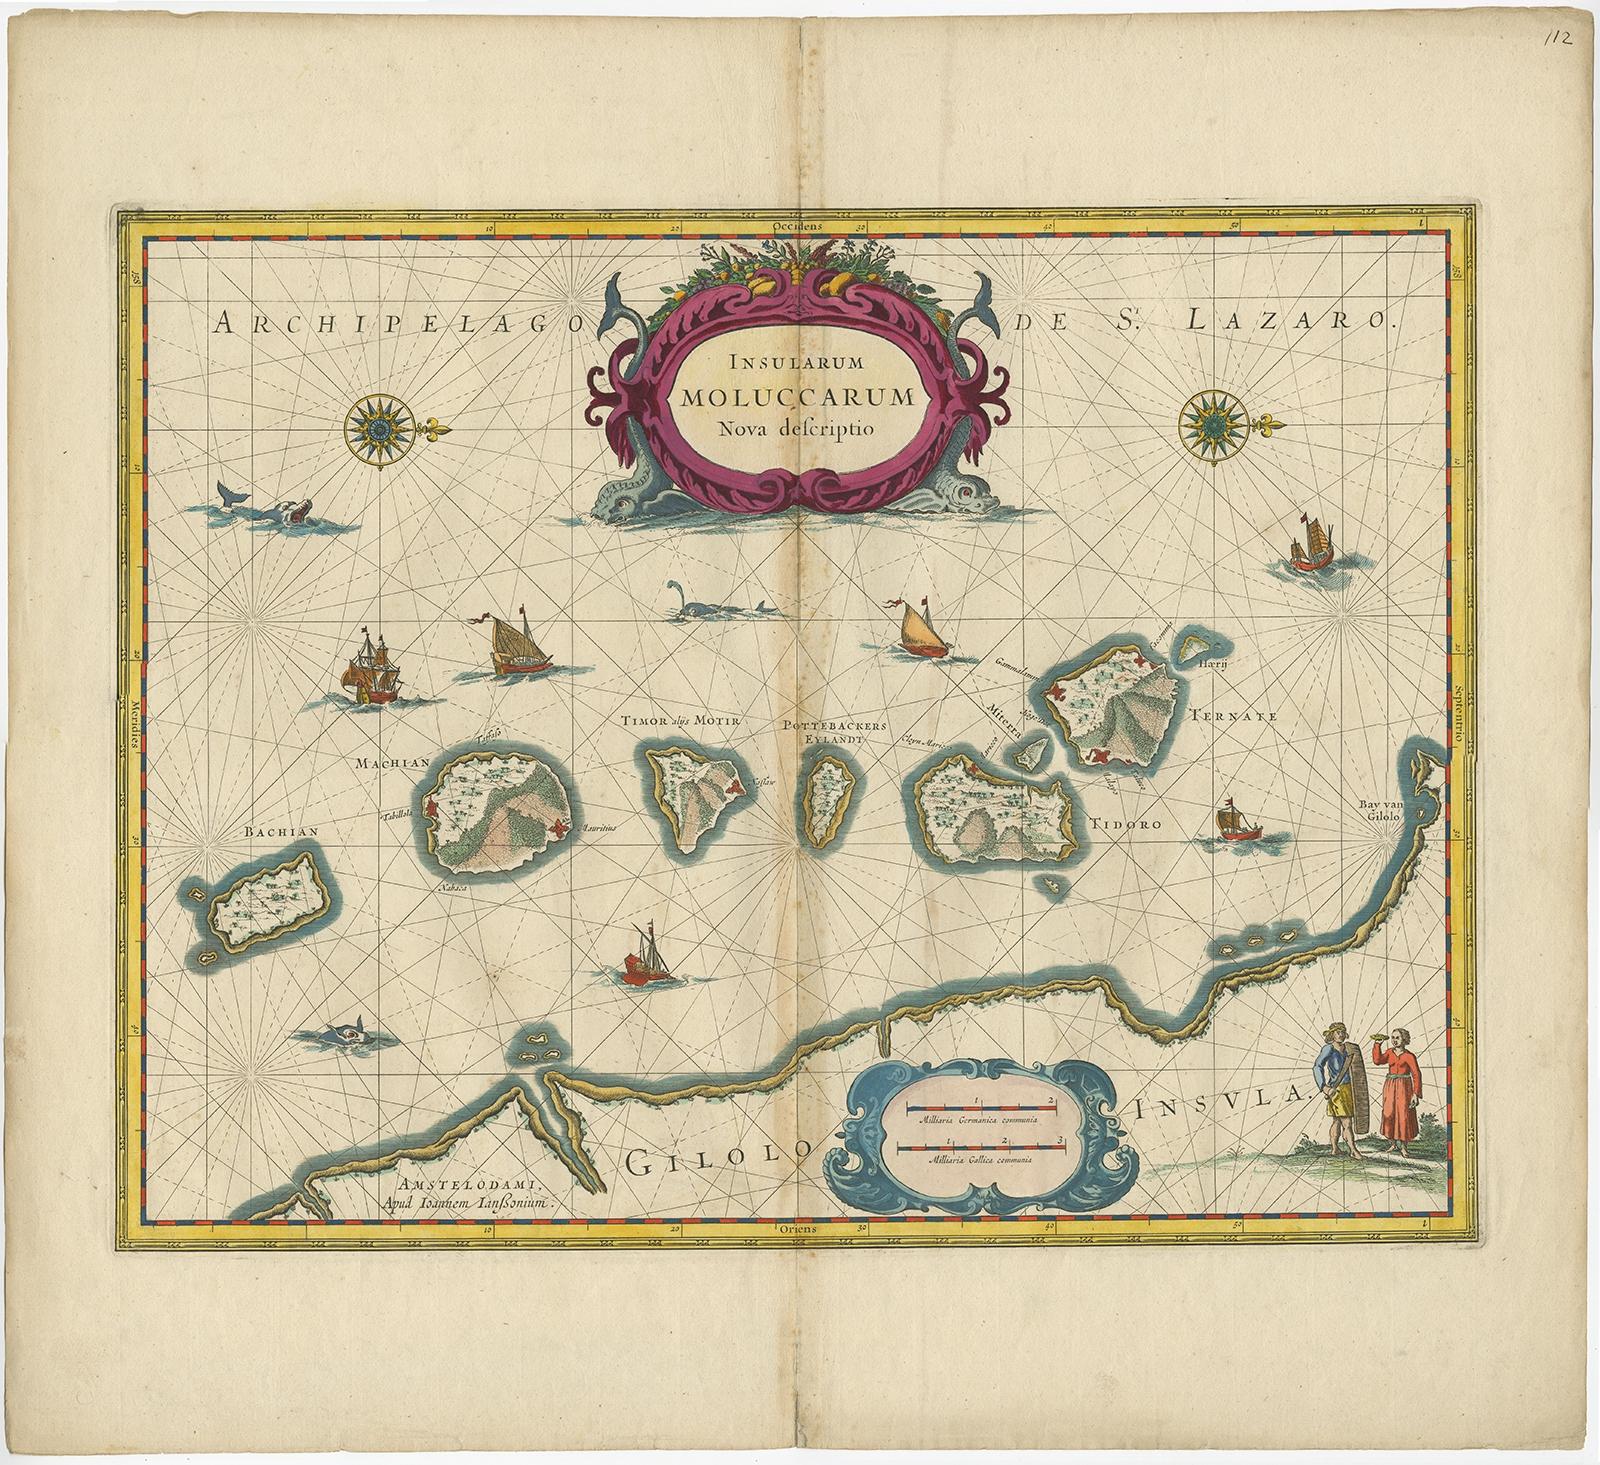 Antique map titled 'Insularum Moluccarum Nova Descriptio.' 

Beautiful map of the Moluccas. The famous Spice Islands, the cornerstone of the Dutch trading empire in the East Indies throughout the 17th Century, is the focus of this exquisite map.